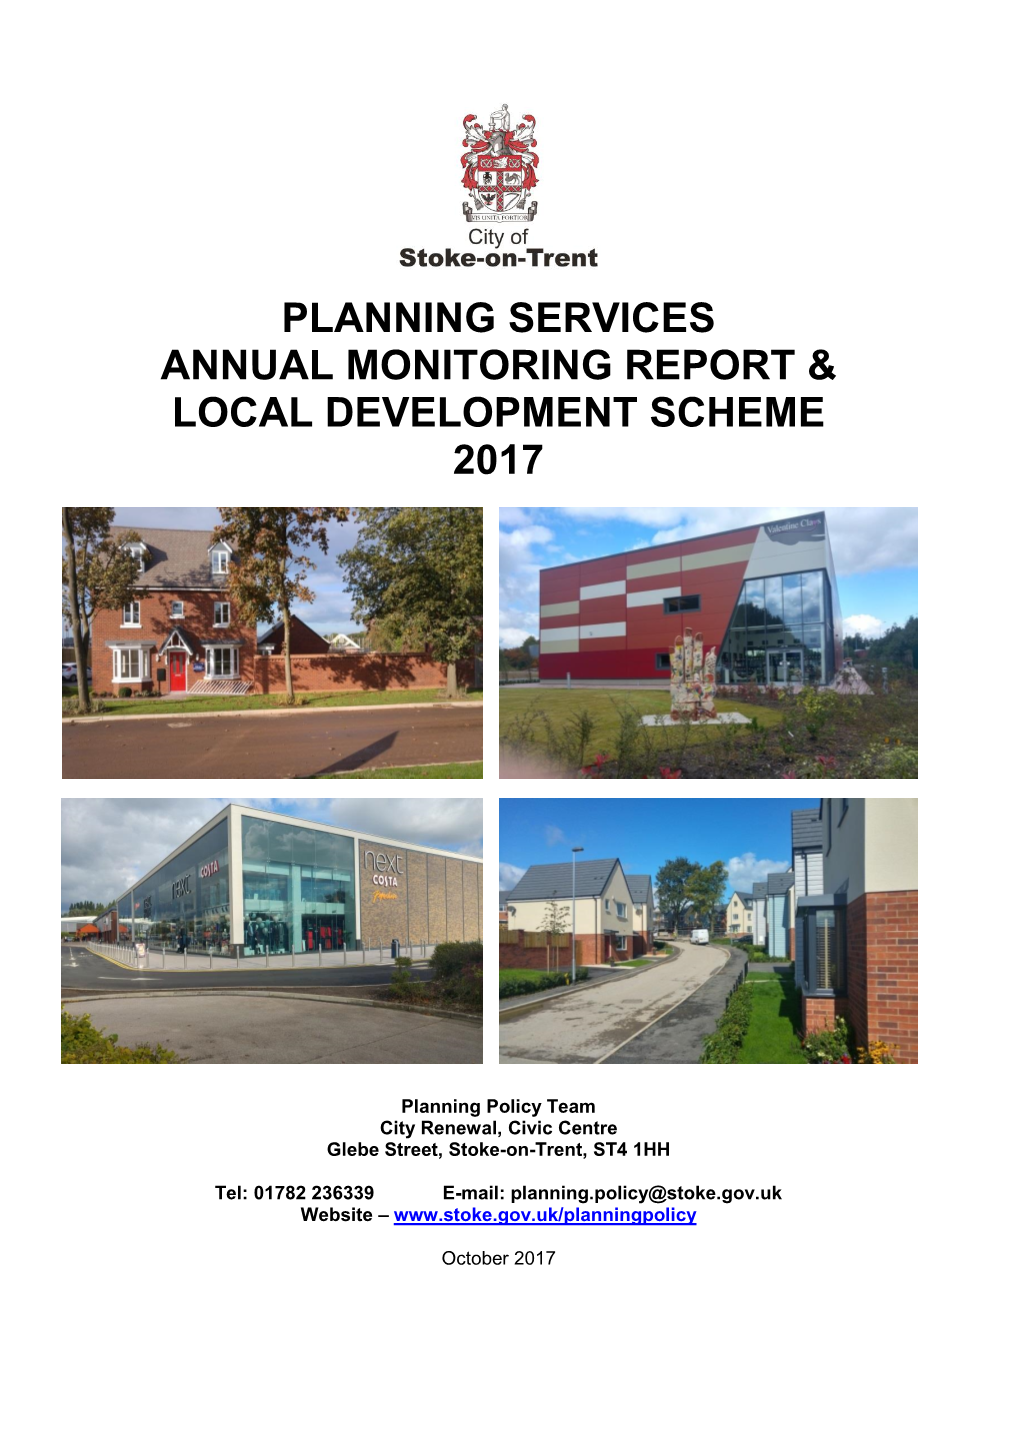 Planning Services Annual Monitoring Report & Local